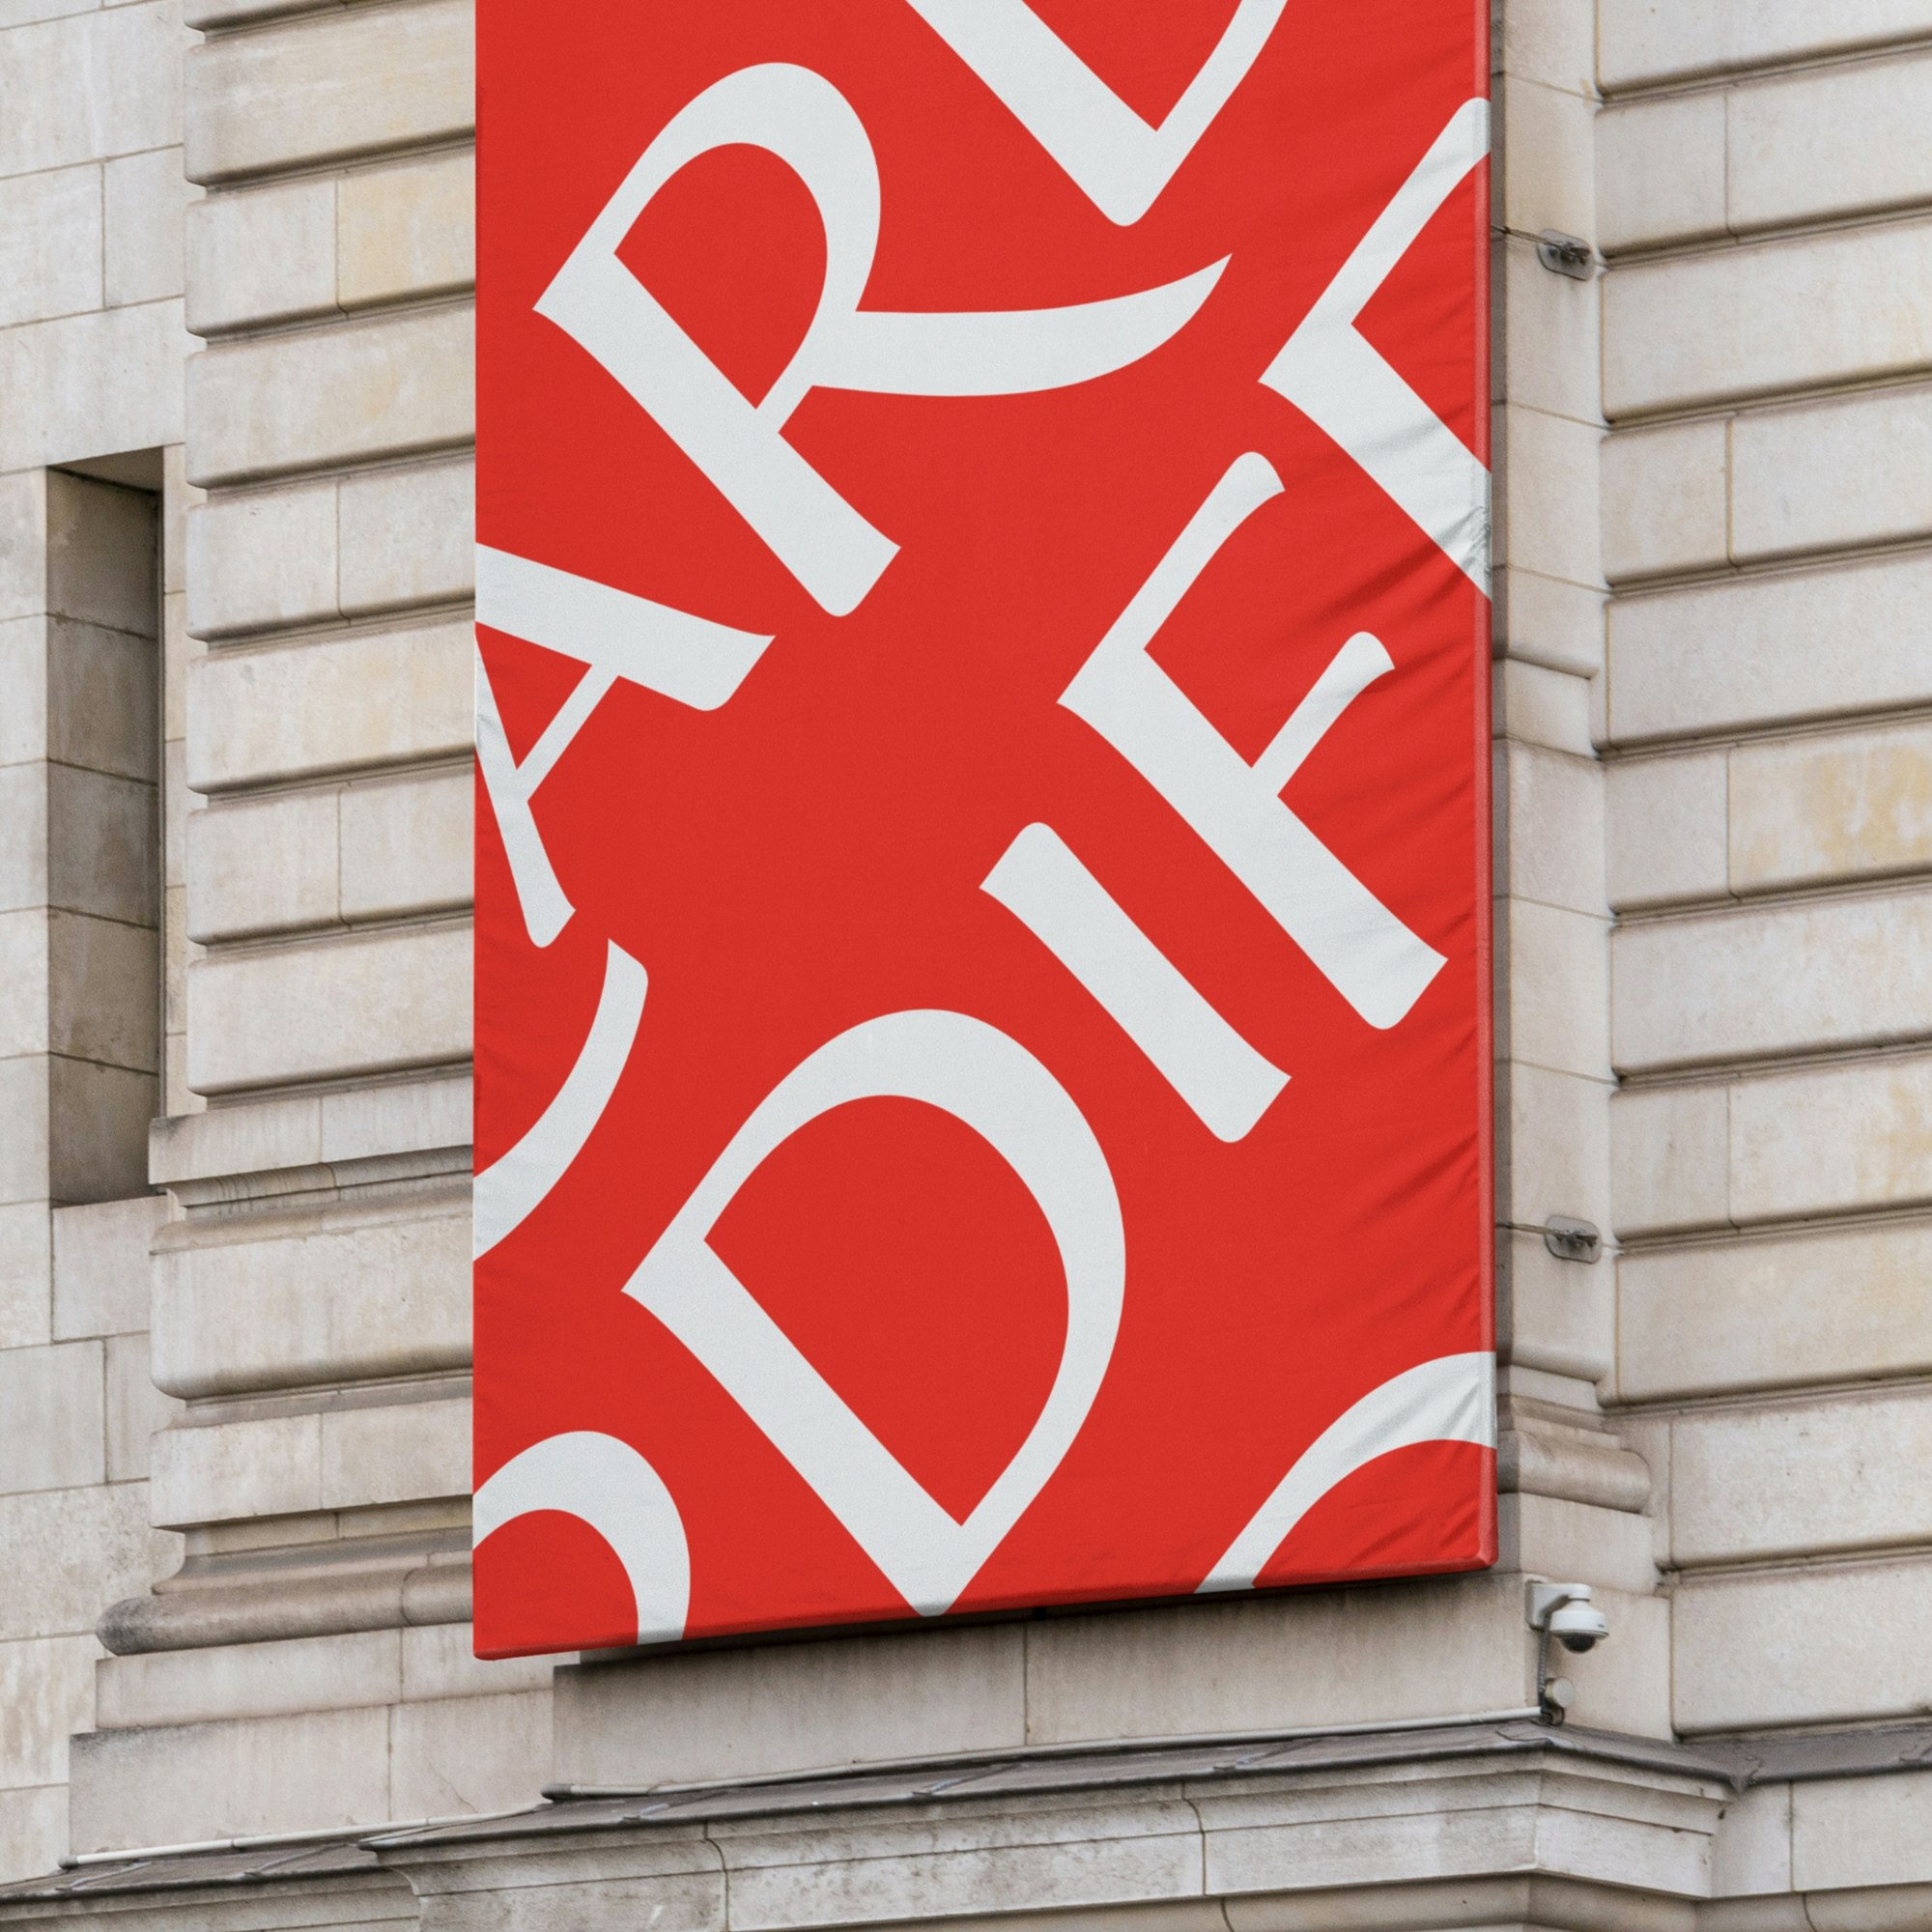 A mockup of a banner for Cardiff University